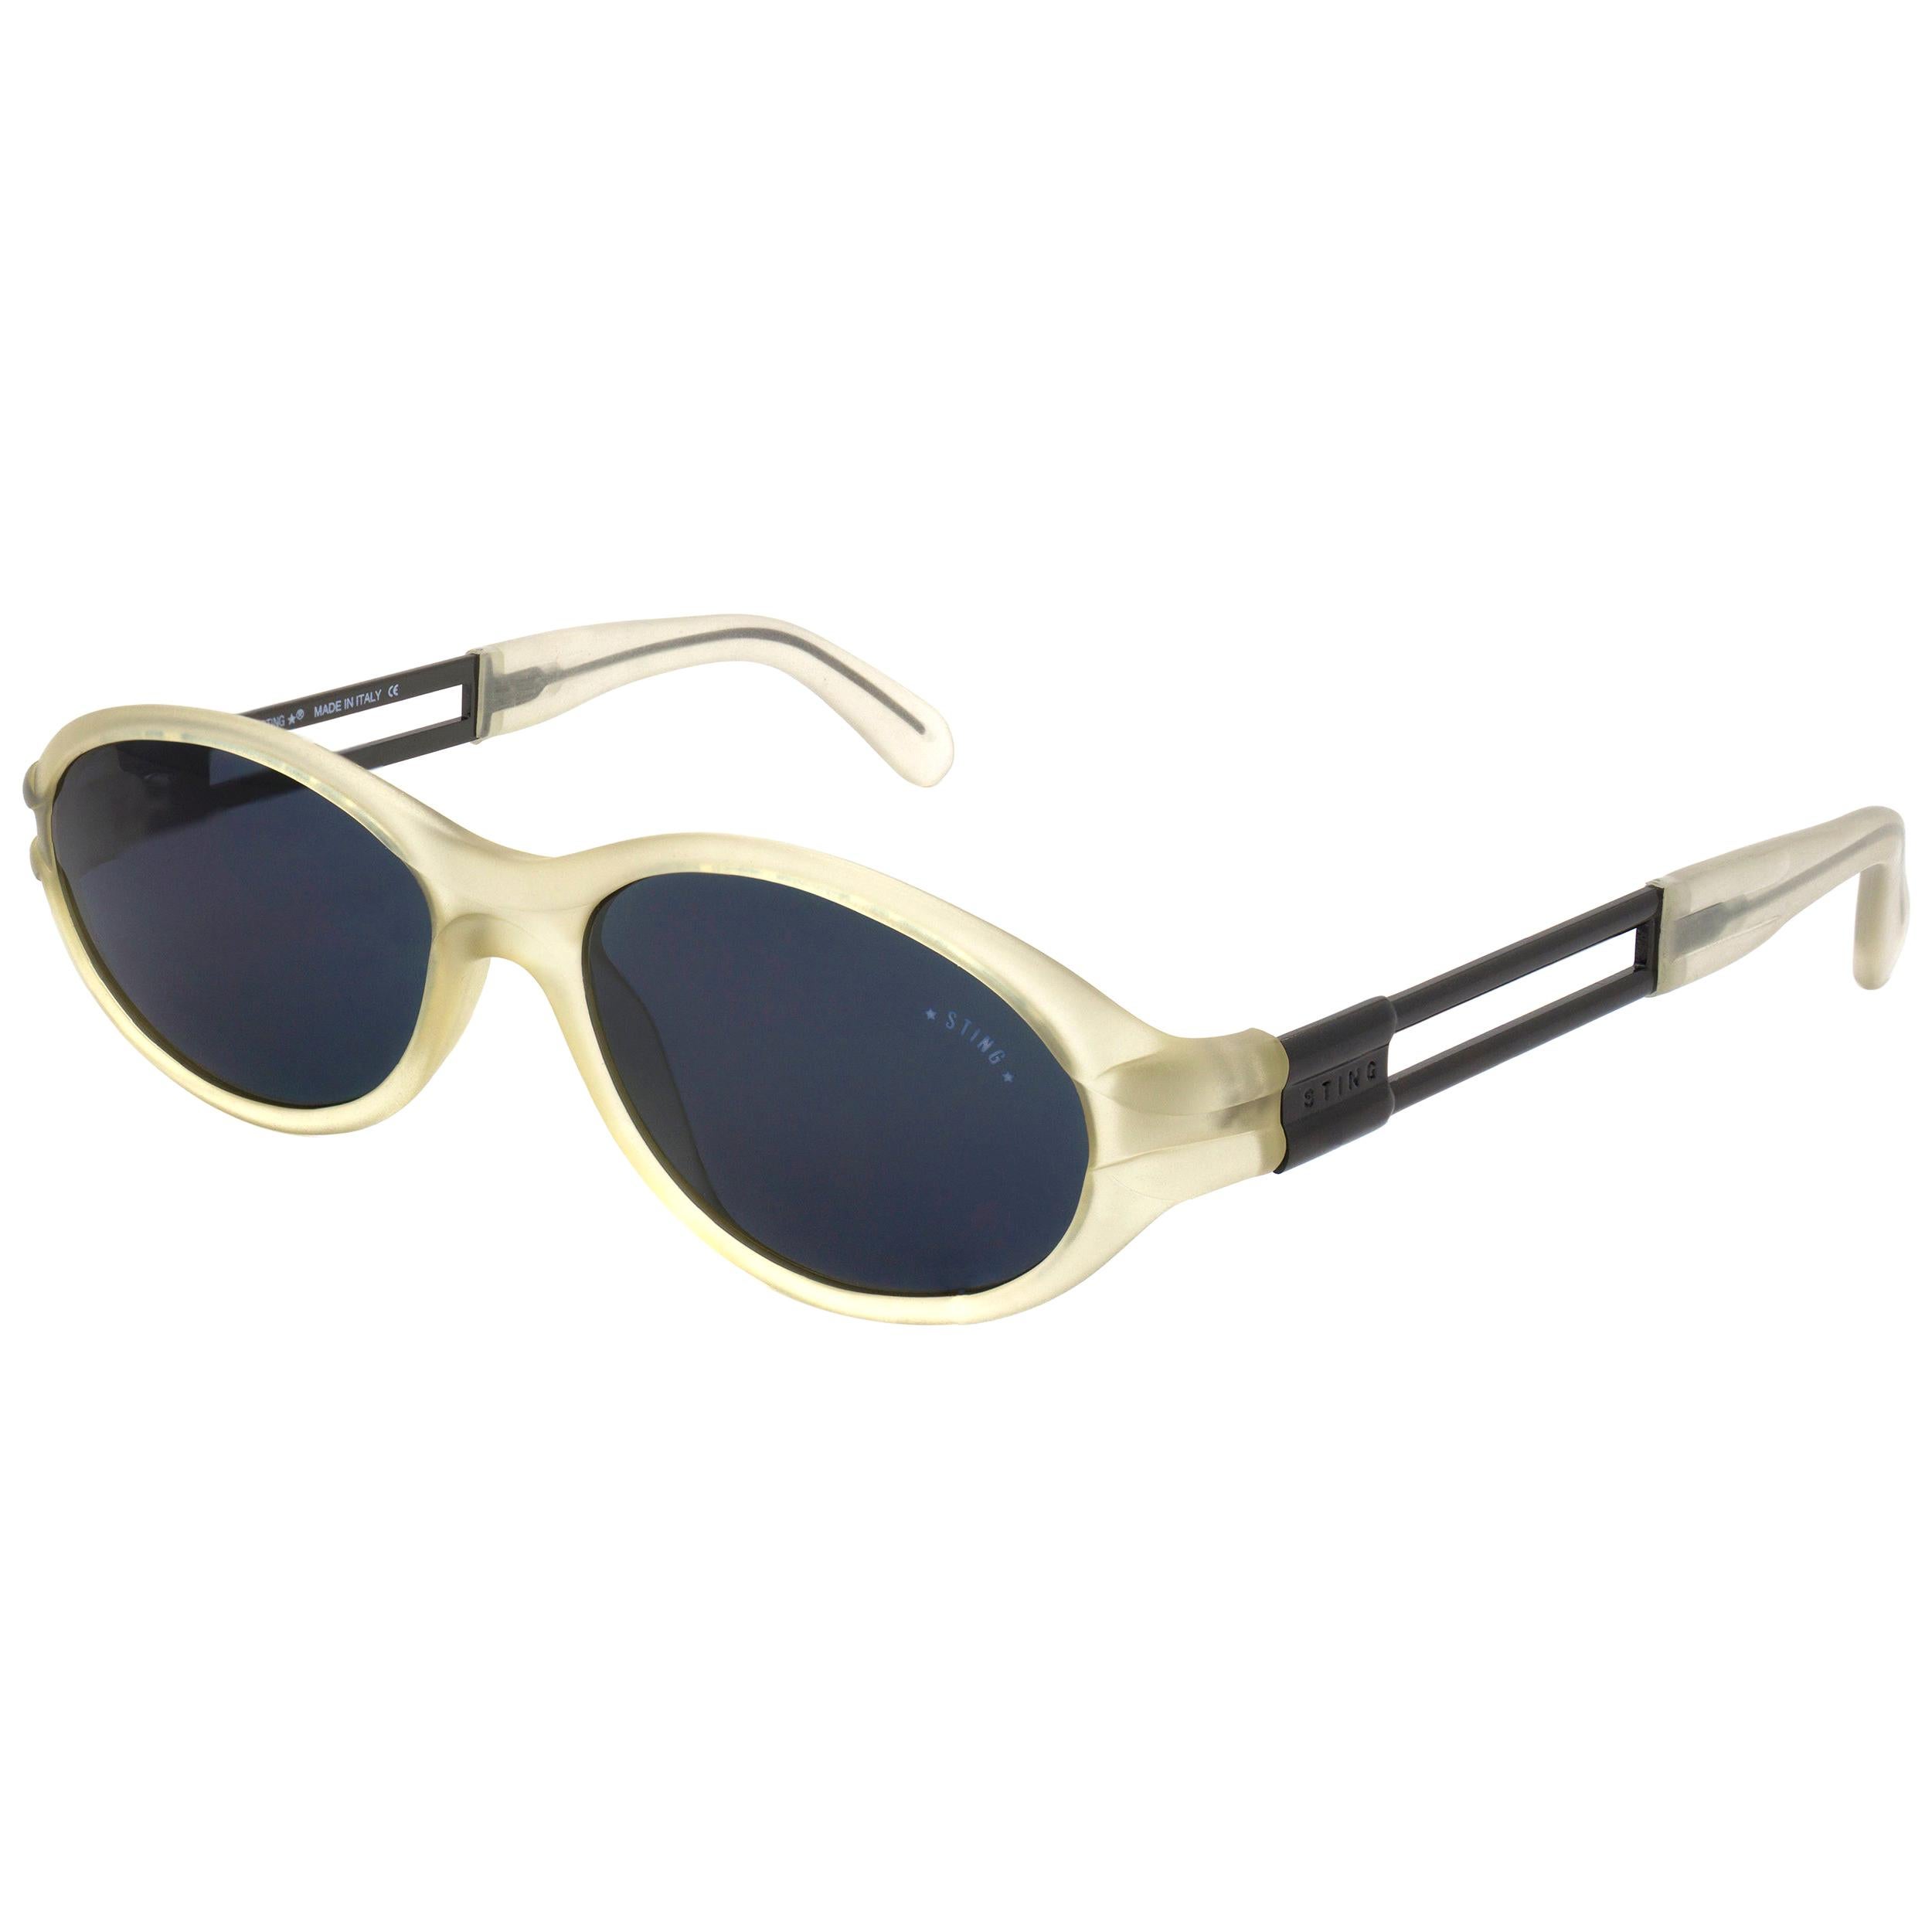 Sting vintage sunglasses, made in Italy For Sale